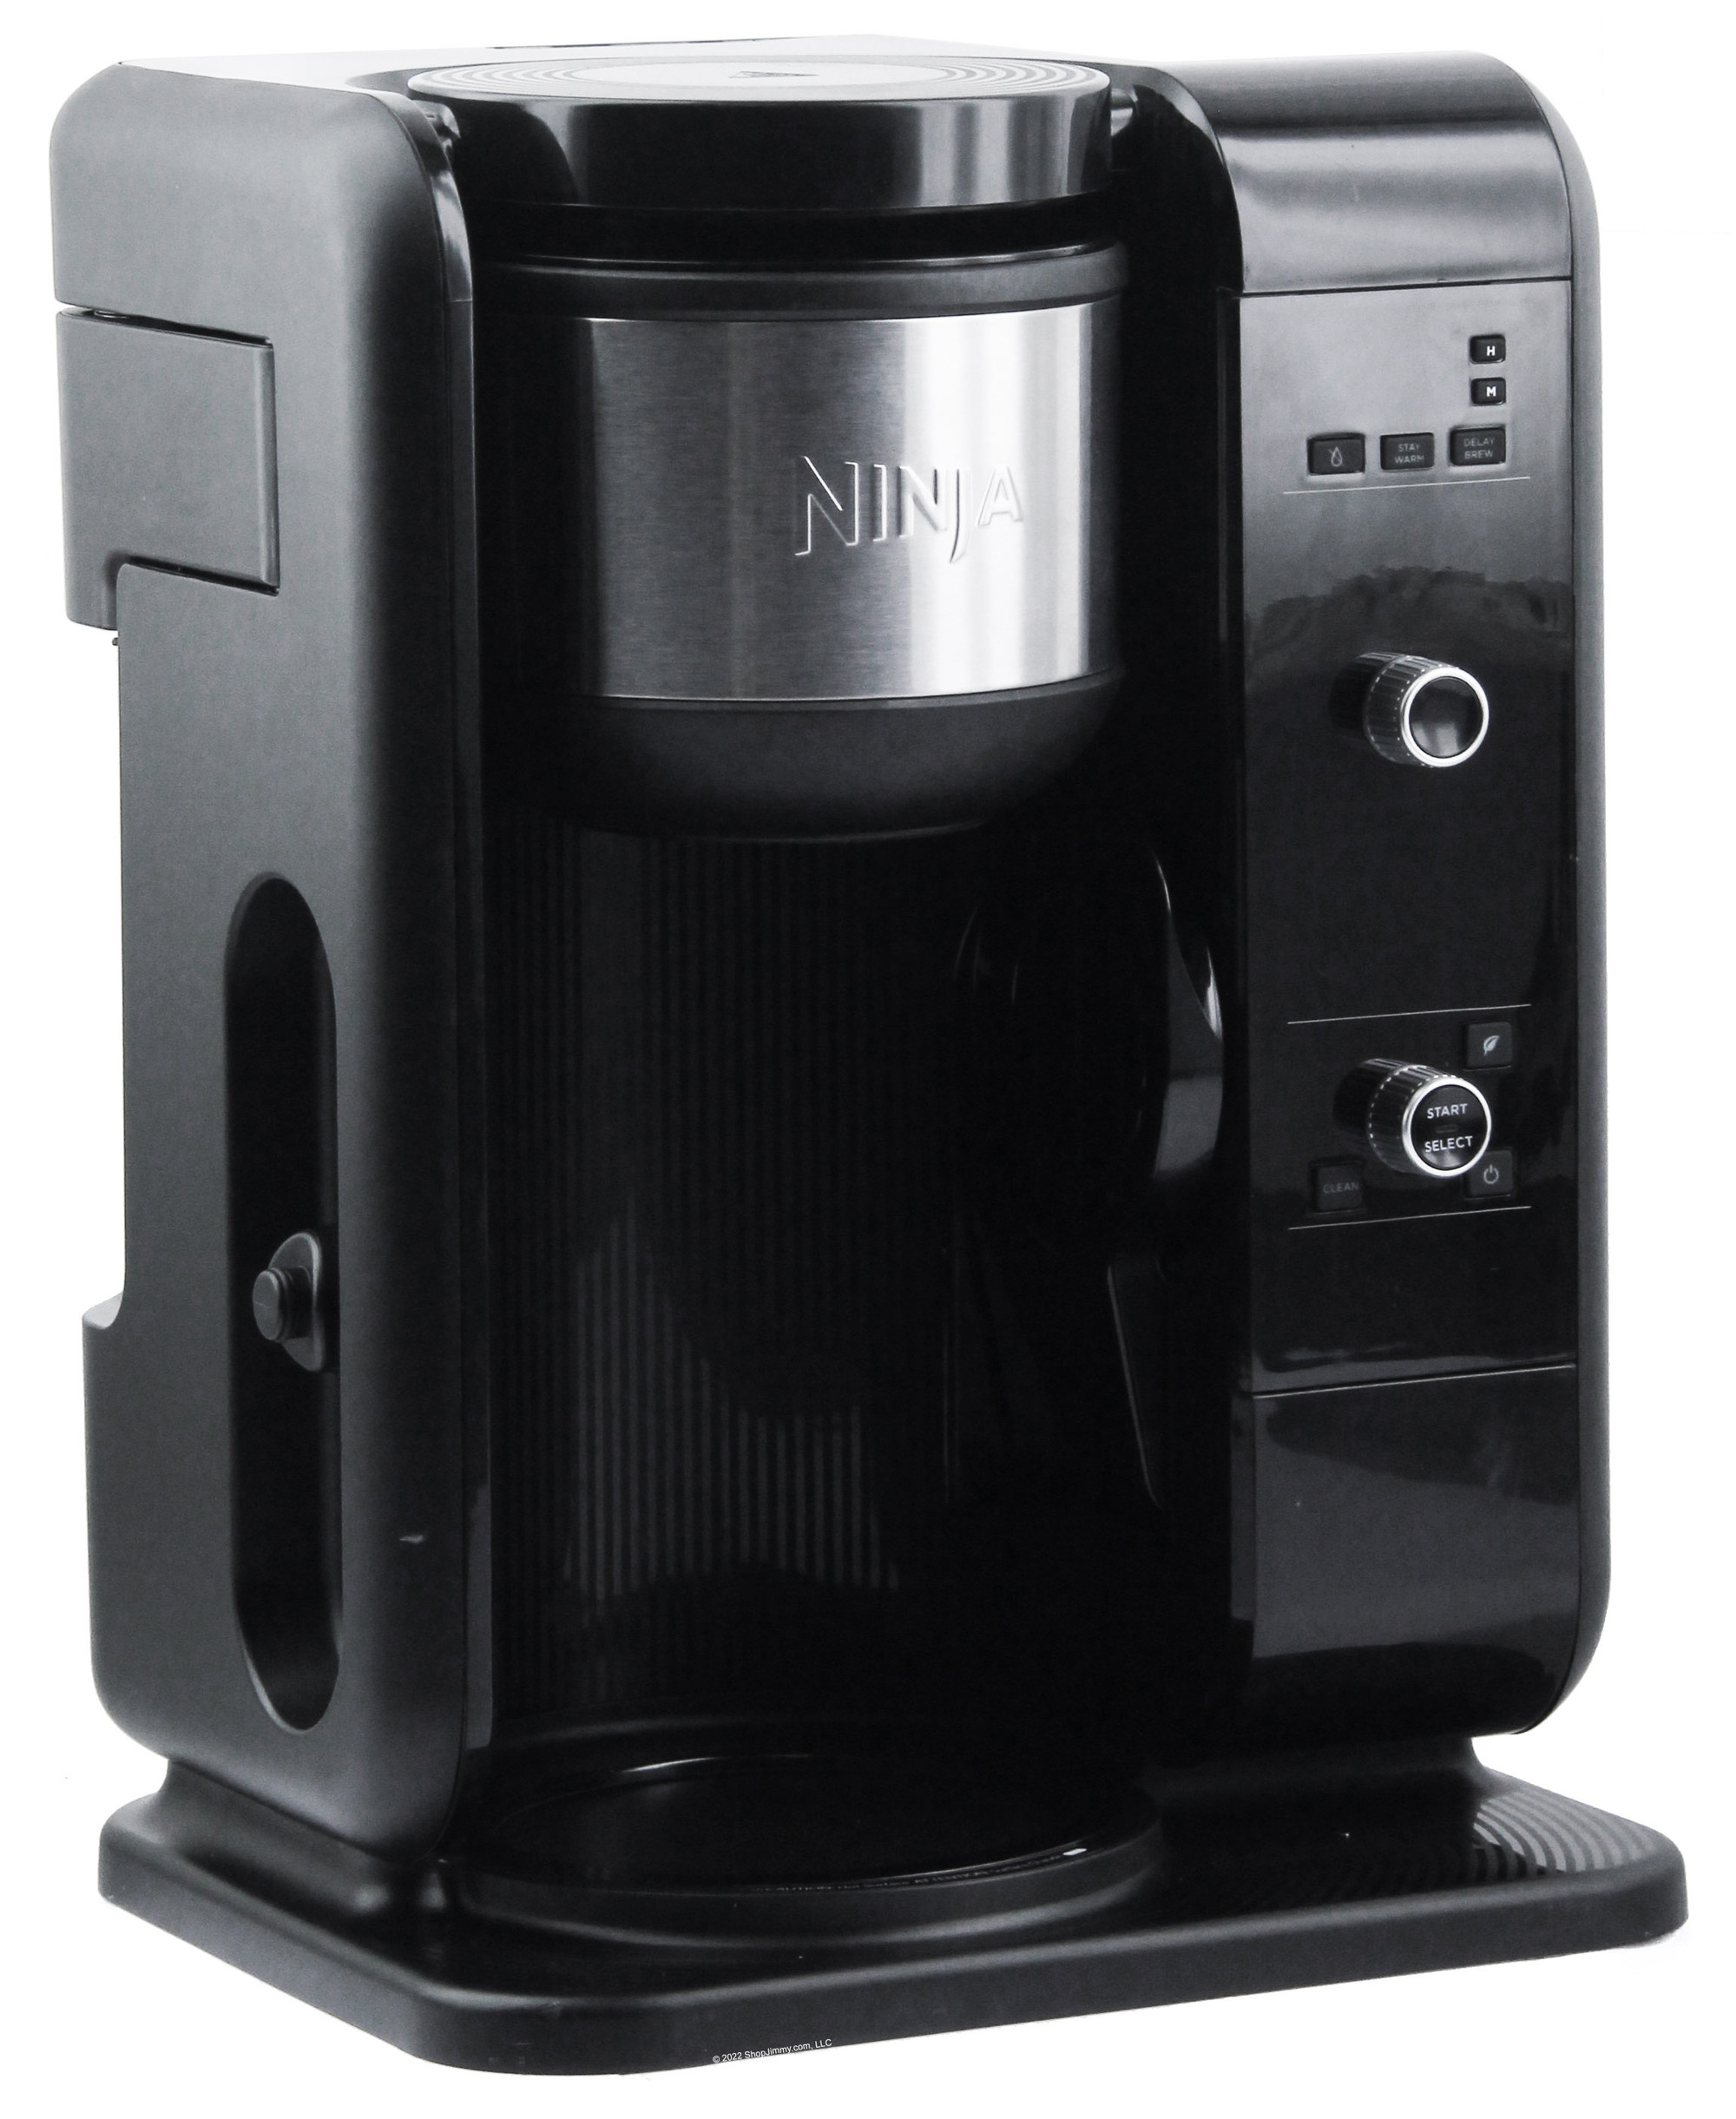 Ninja Hot and Cold Brew System - PRODUCT REVIEW 